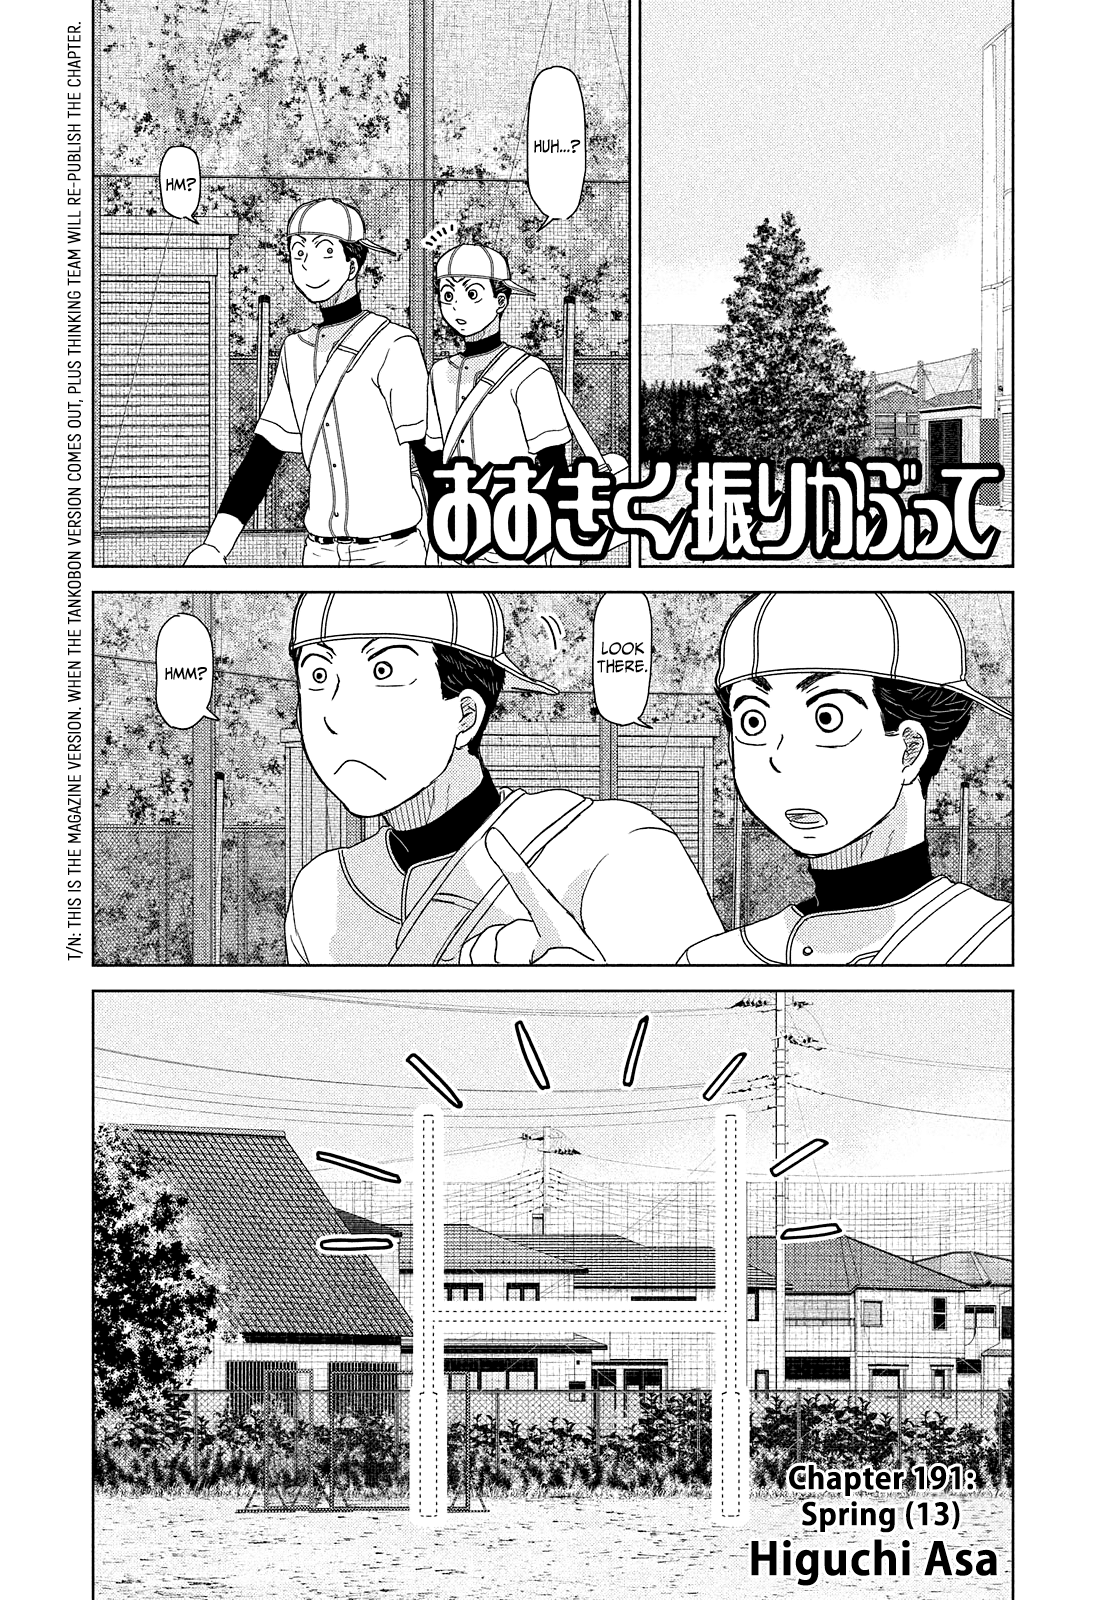 Ookiku Furikabutte Chapter 191: Spring (13) (Mag) - Picture 1